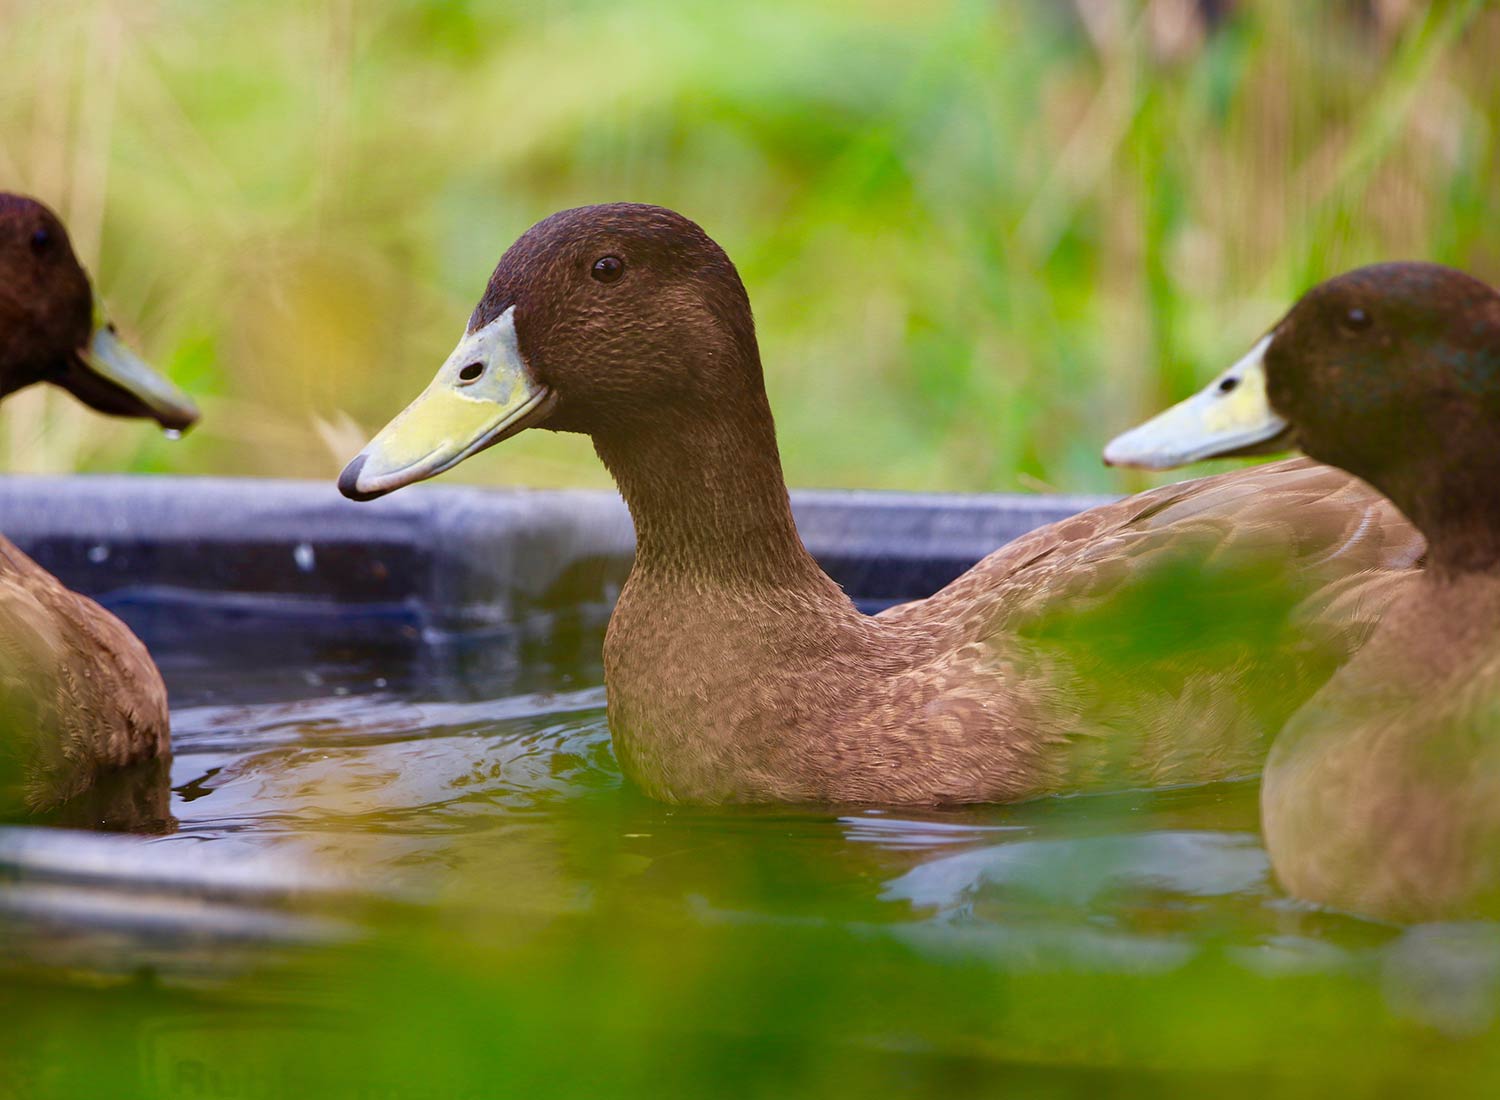 Sanctuary at SHO: redefining animal agriculture | partnering with 100+ rescued ducks to steward non-harming perennial food systems  